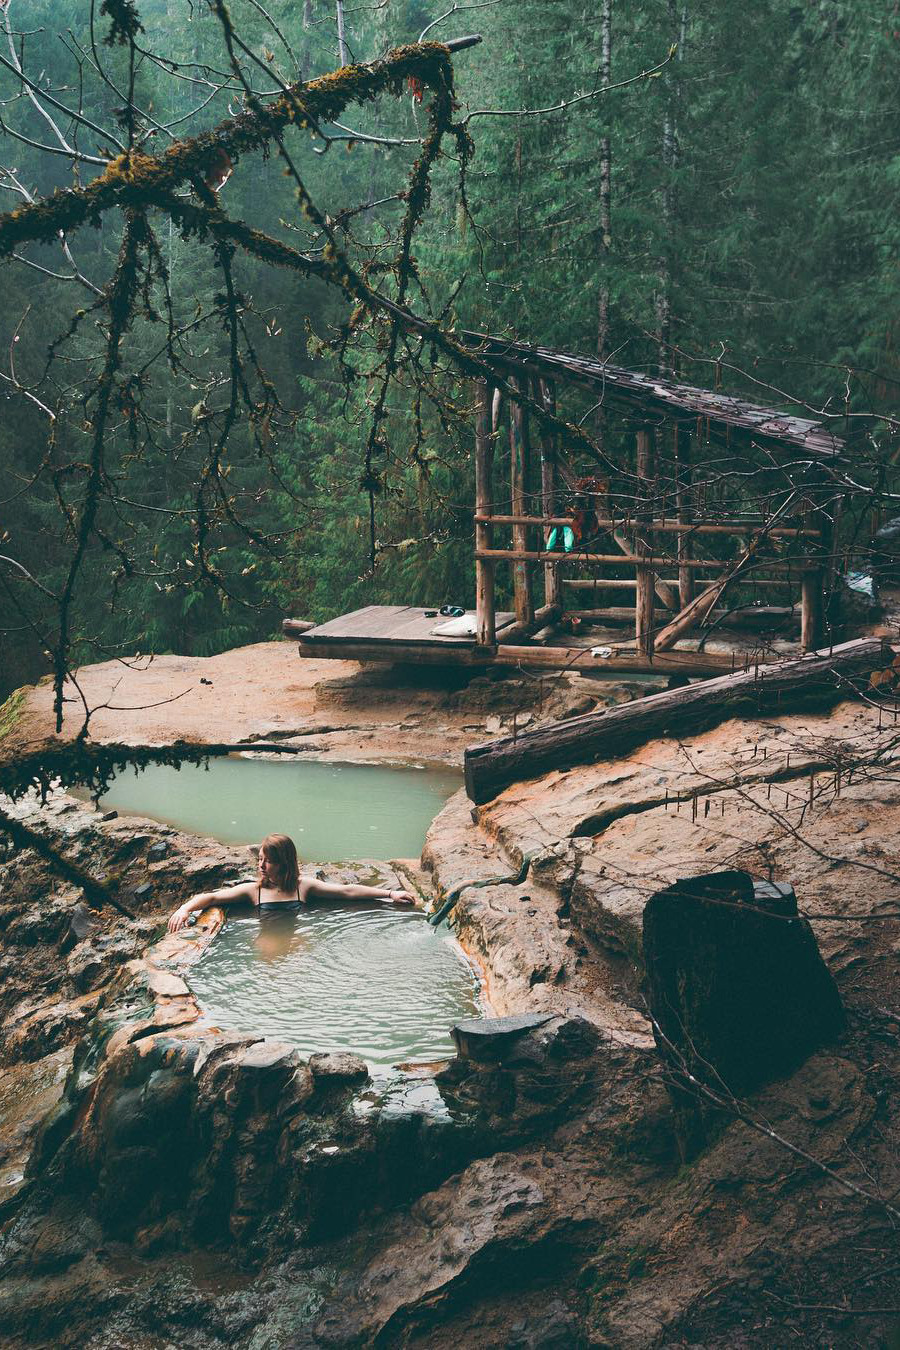 Awesome picture of a natural Jacuzzi hot tub in the middle of nature.